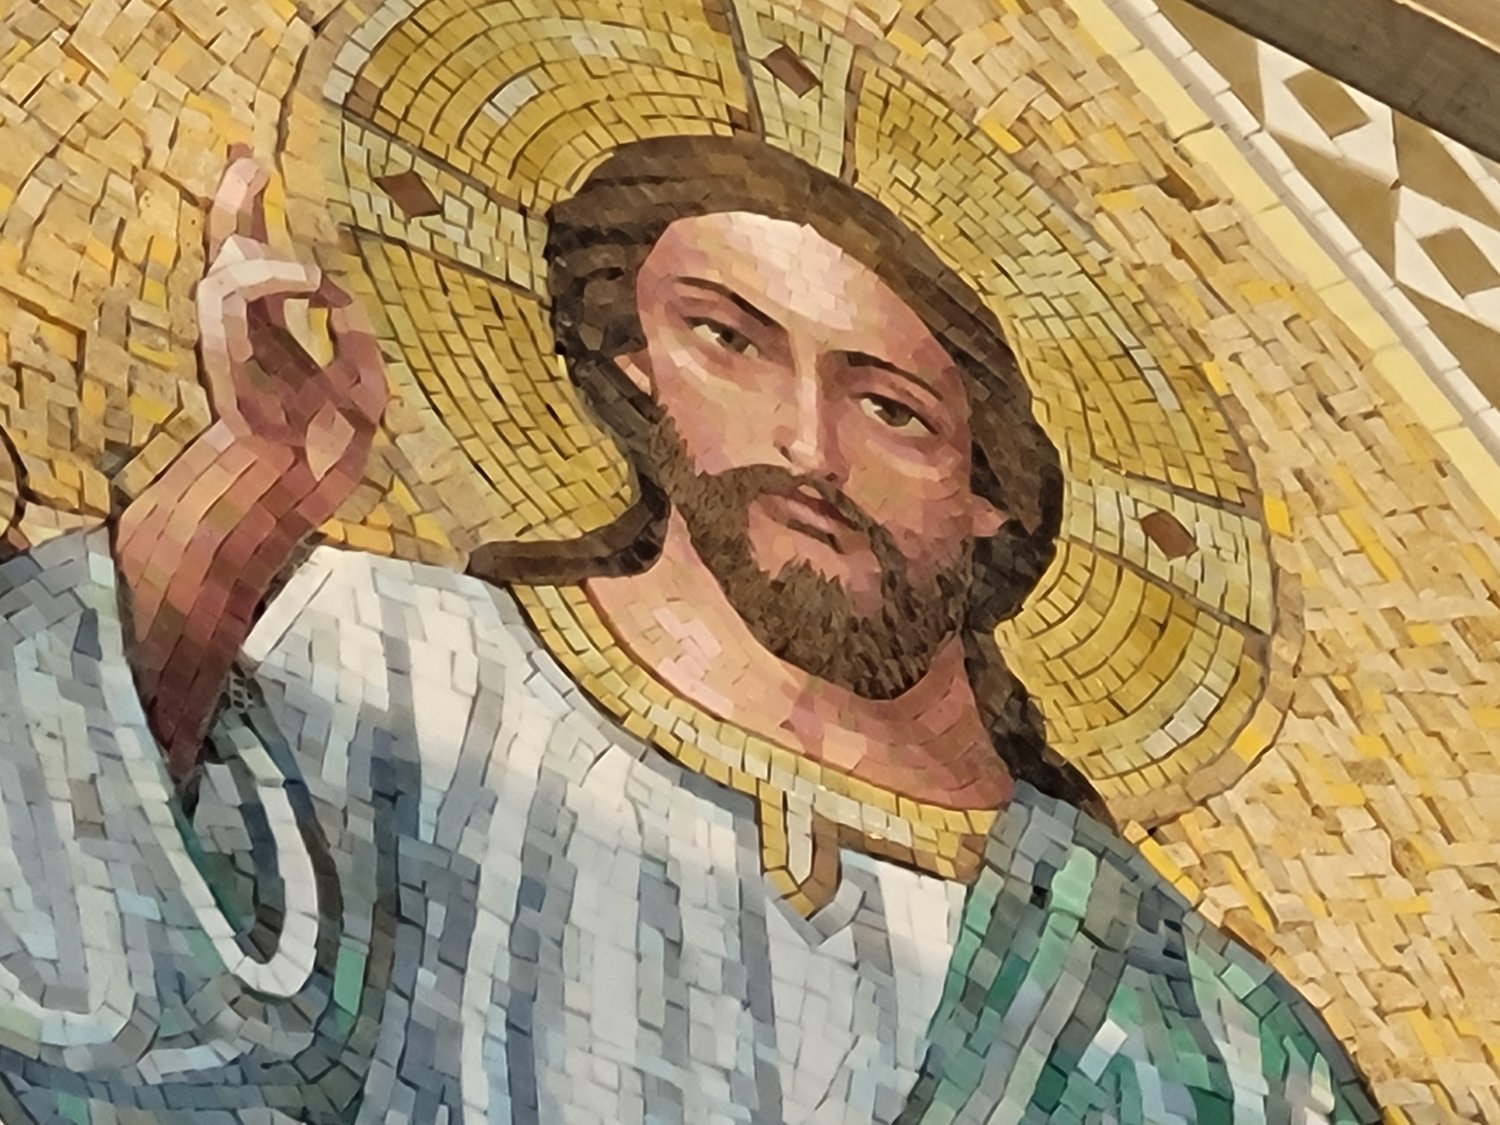 This mosaic image, titled “Christ, Ruler of All” adorns the space above the main entrance of the Cathedral of St. Joseph. It is made up of hundreds of intricately hand-cut pieces of stone and glass.